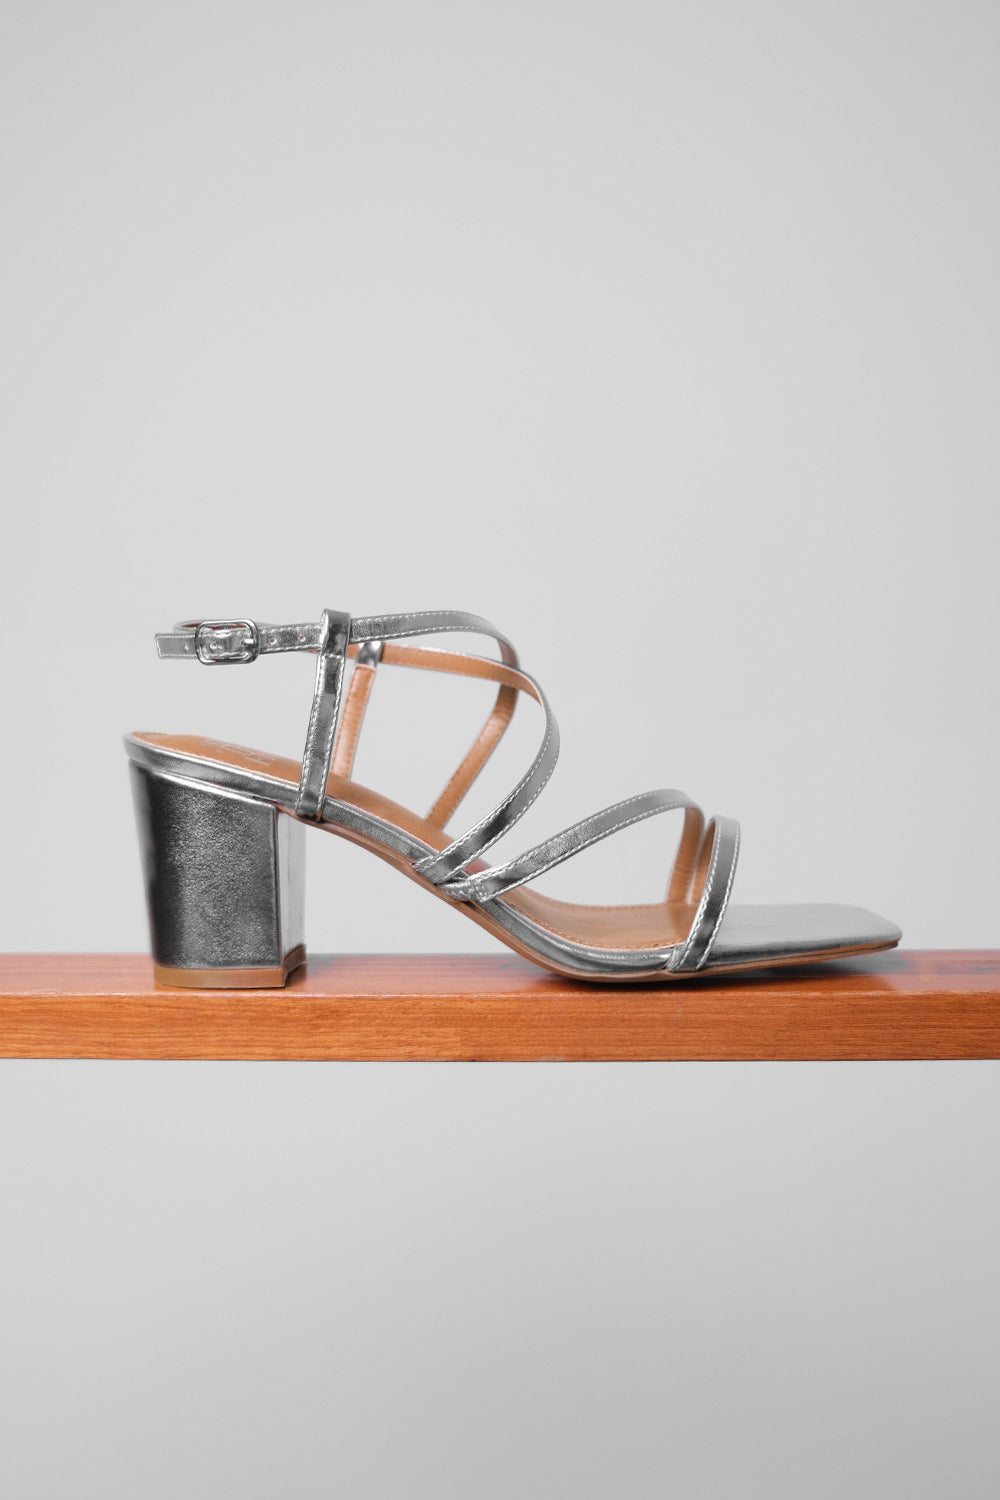 SIDRA WIDE FIT MID HIGH BLOCK HEEL SANDALS WITH CROSS OVER STRAP IN SILVER METALLIC FAUX LEATHER